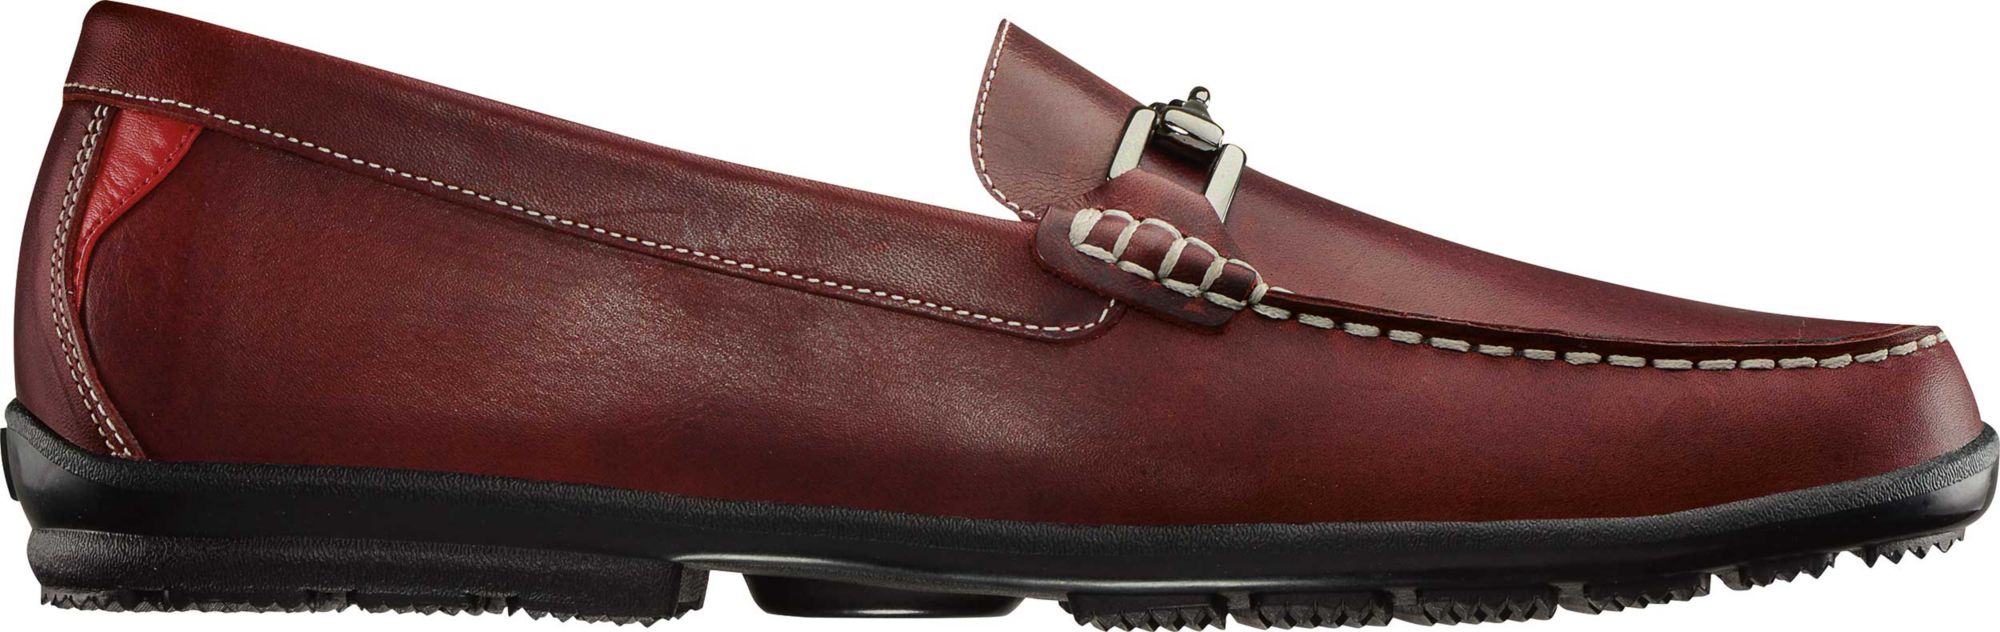 FootJoy Country Club Casuals Golf Shoes 